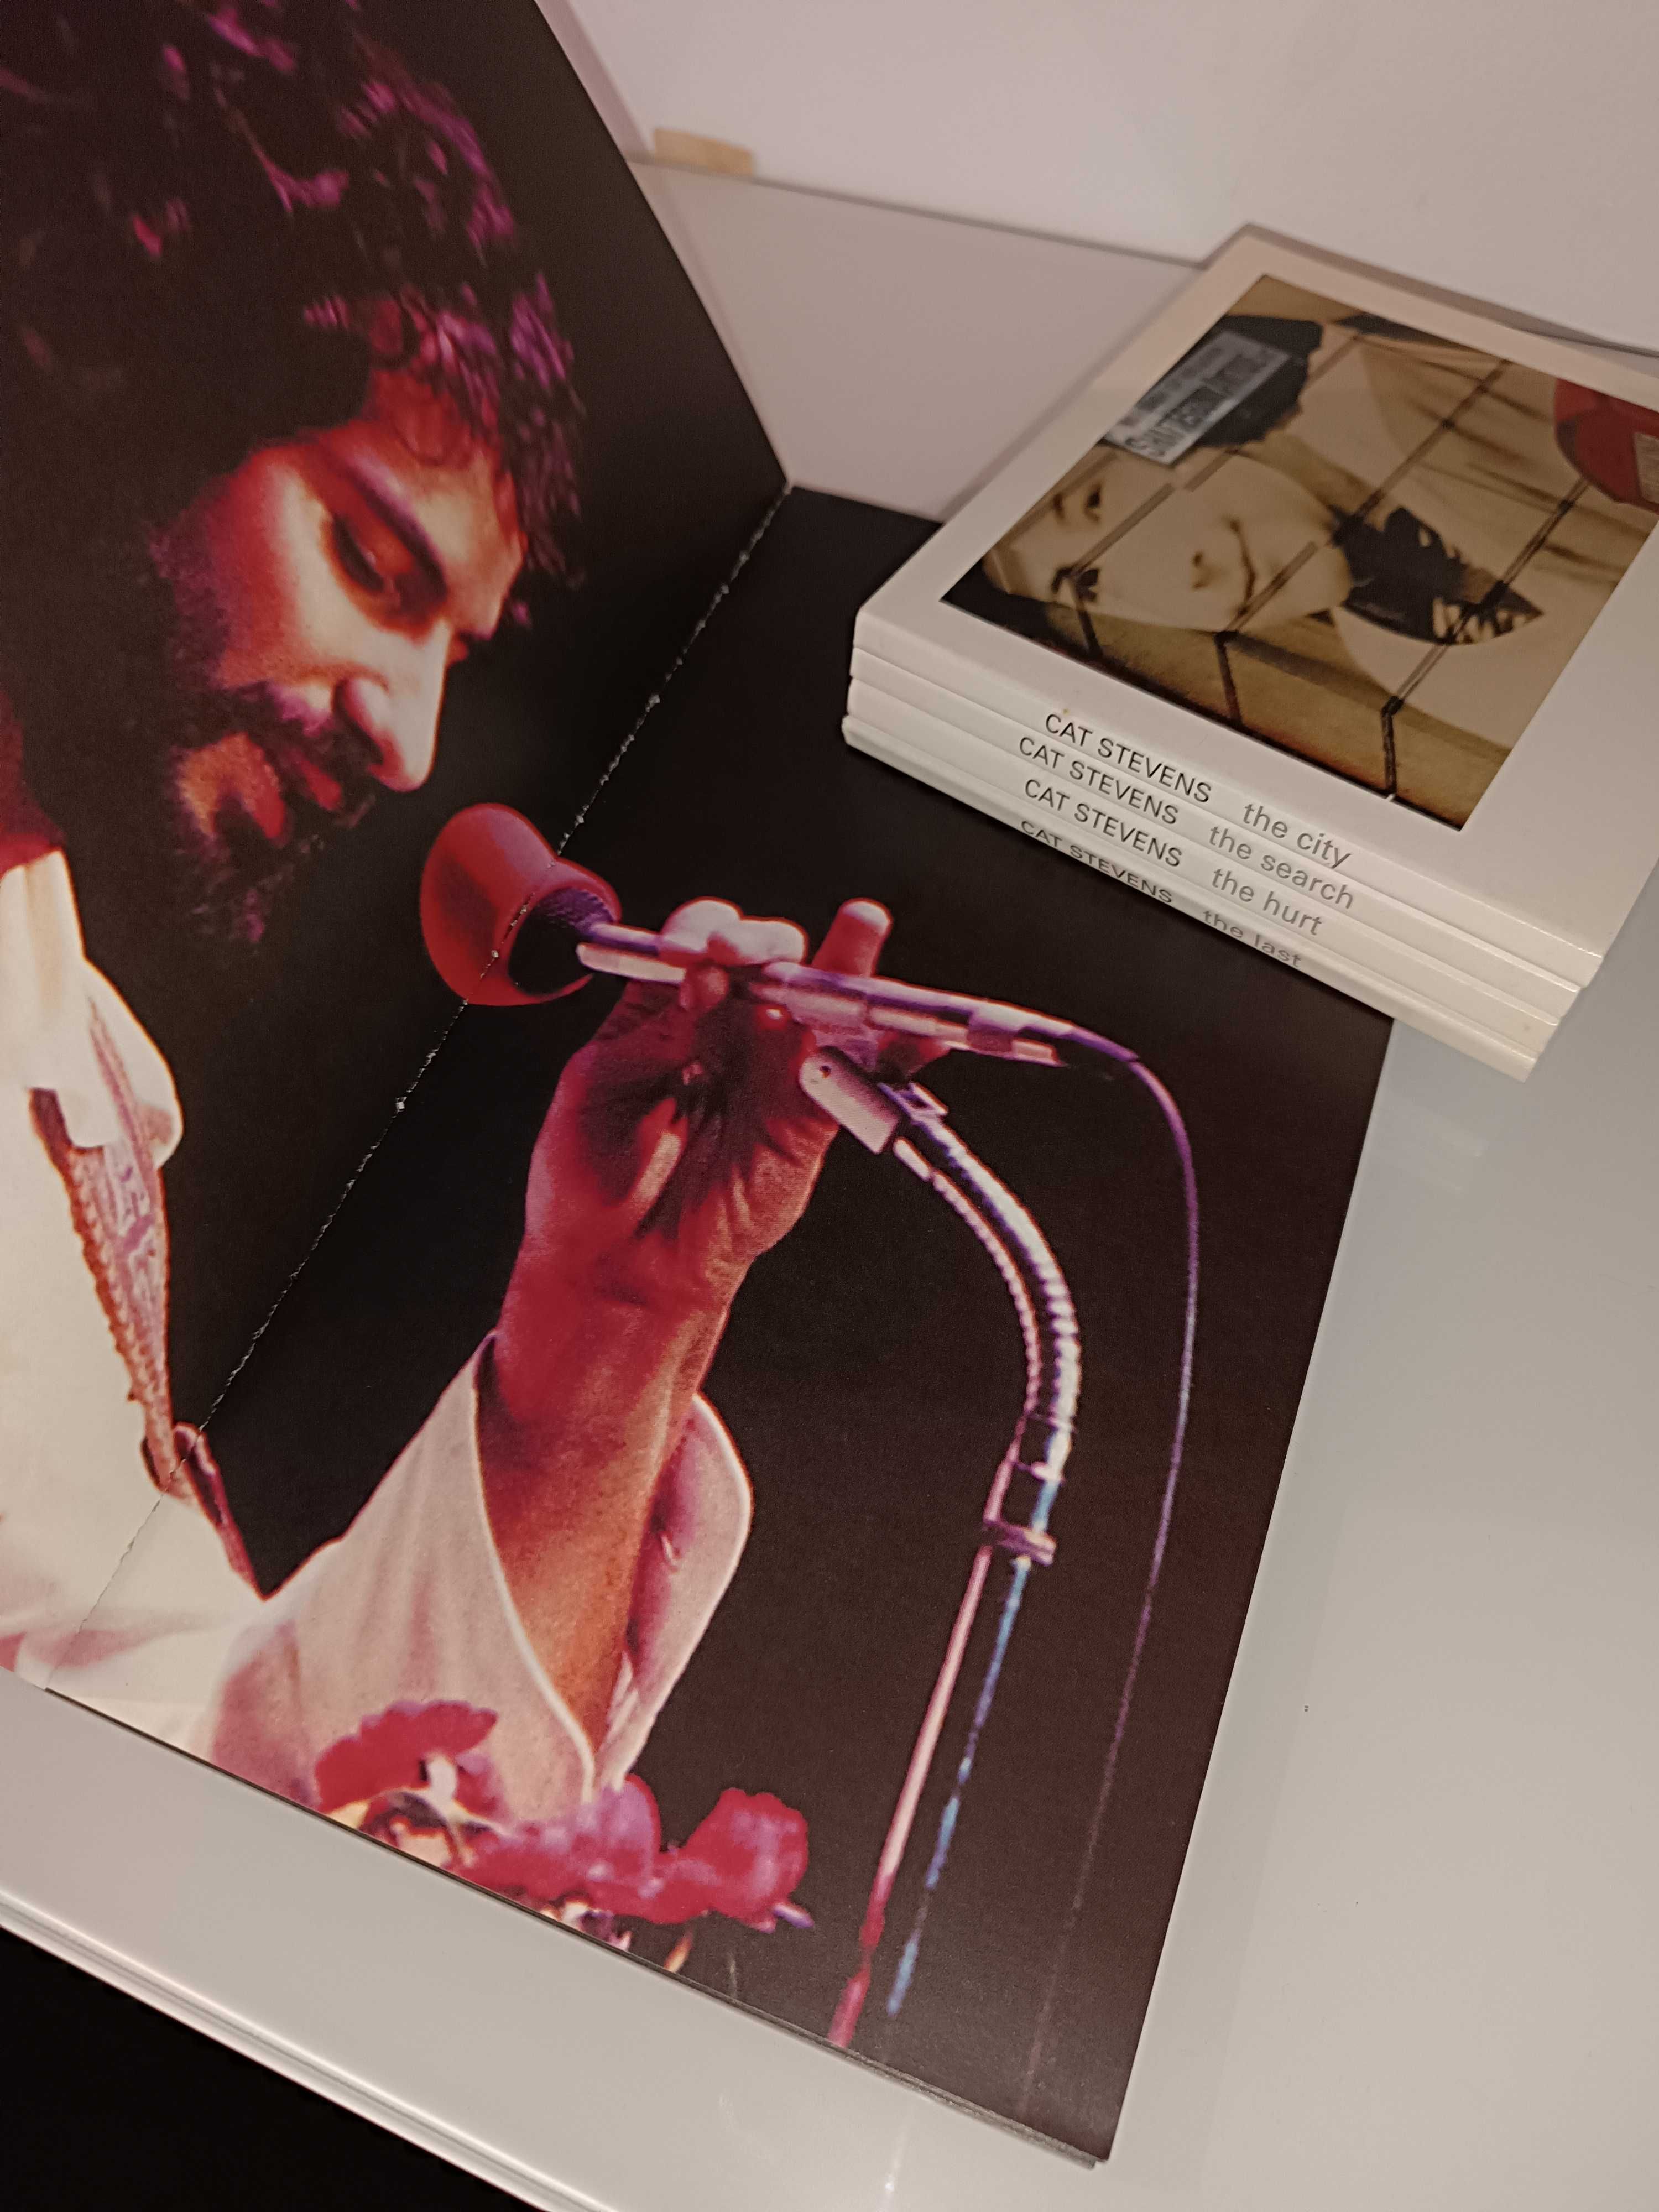 Cat Stevens Boxset "On The Road To Find Out"